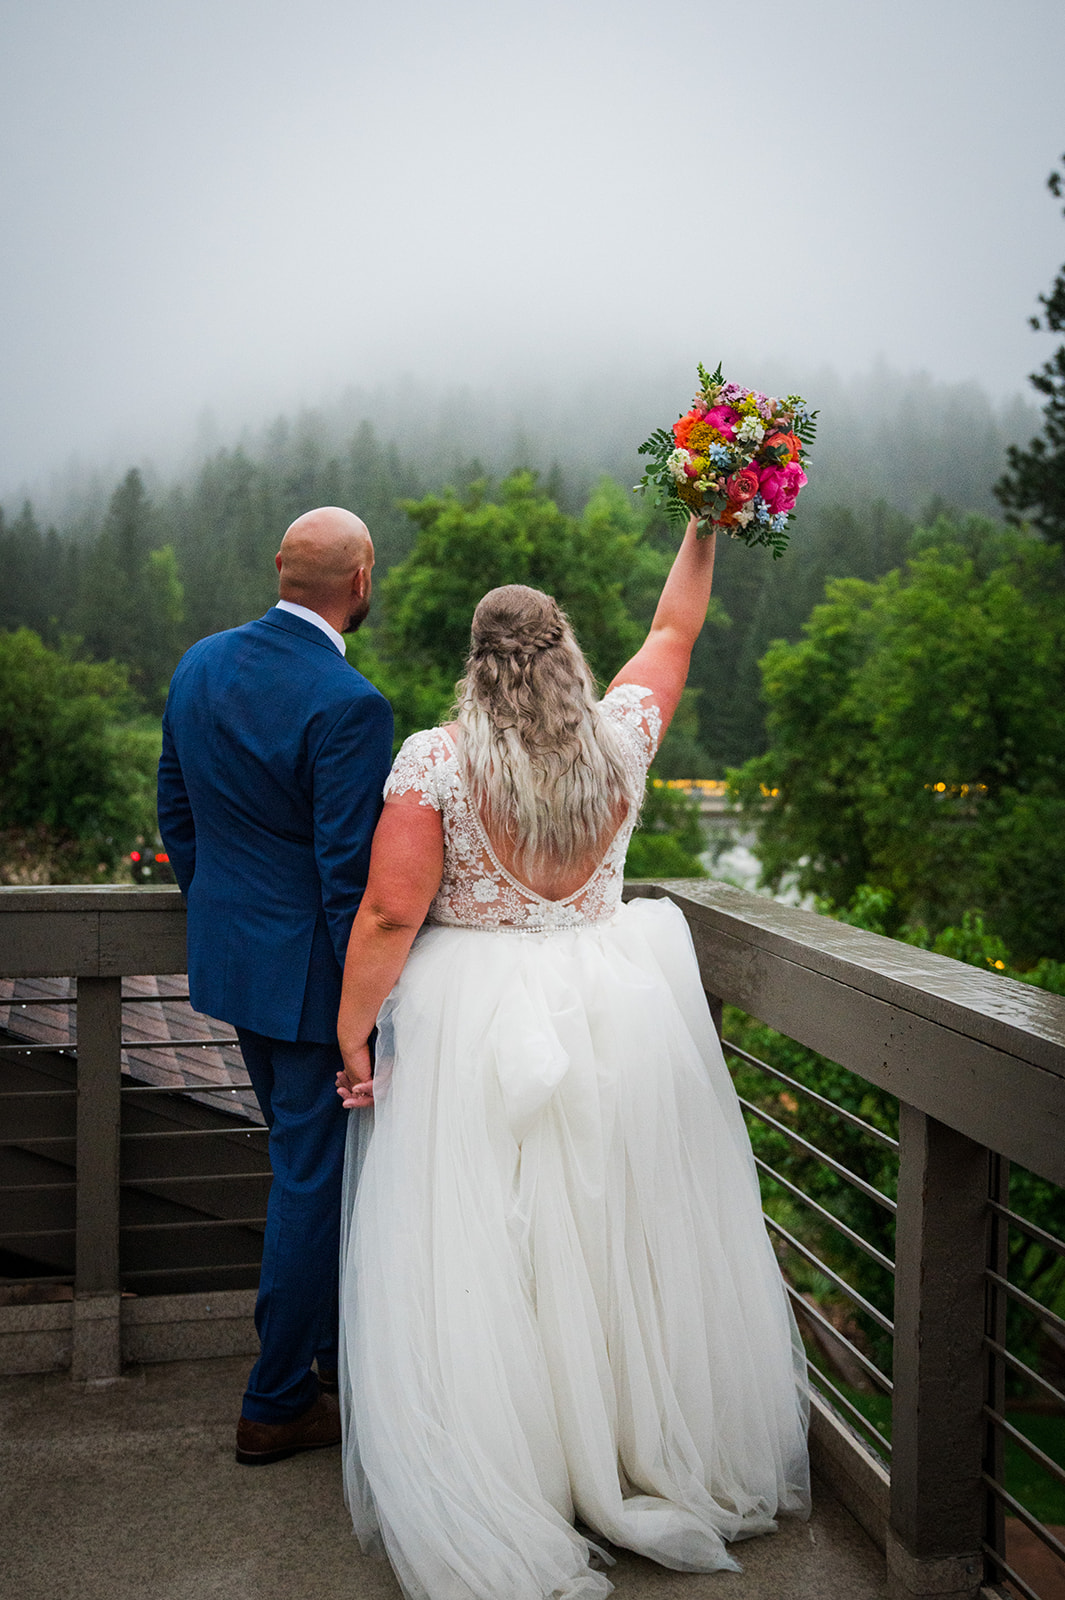 The bride and groom stand on a terrace overlooking a foggy view.